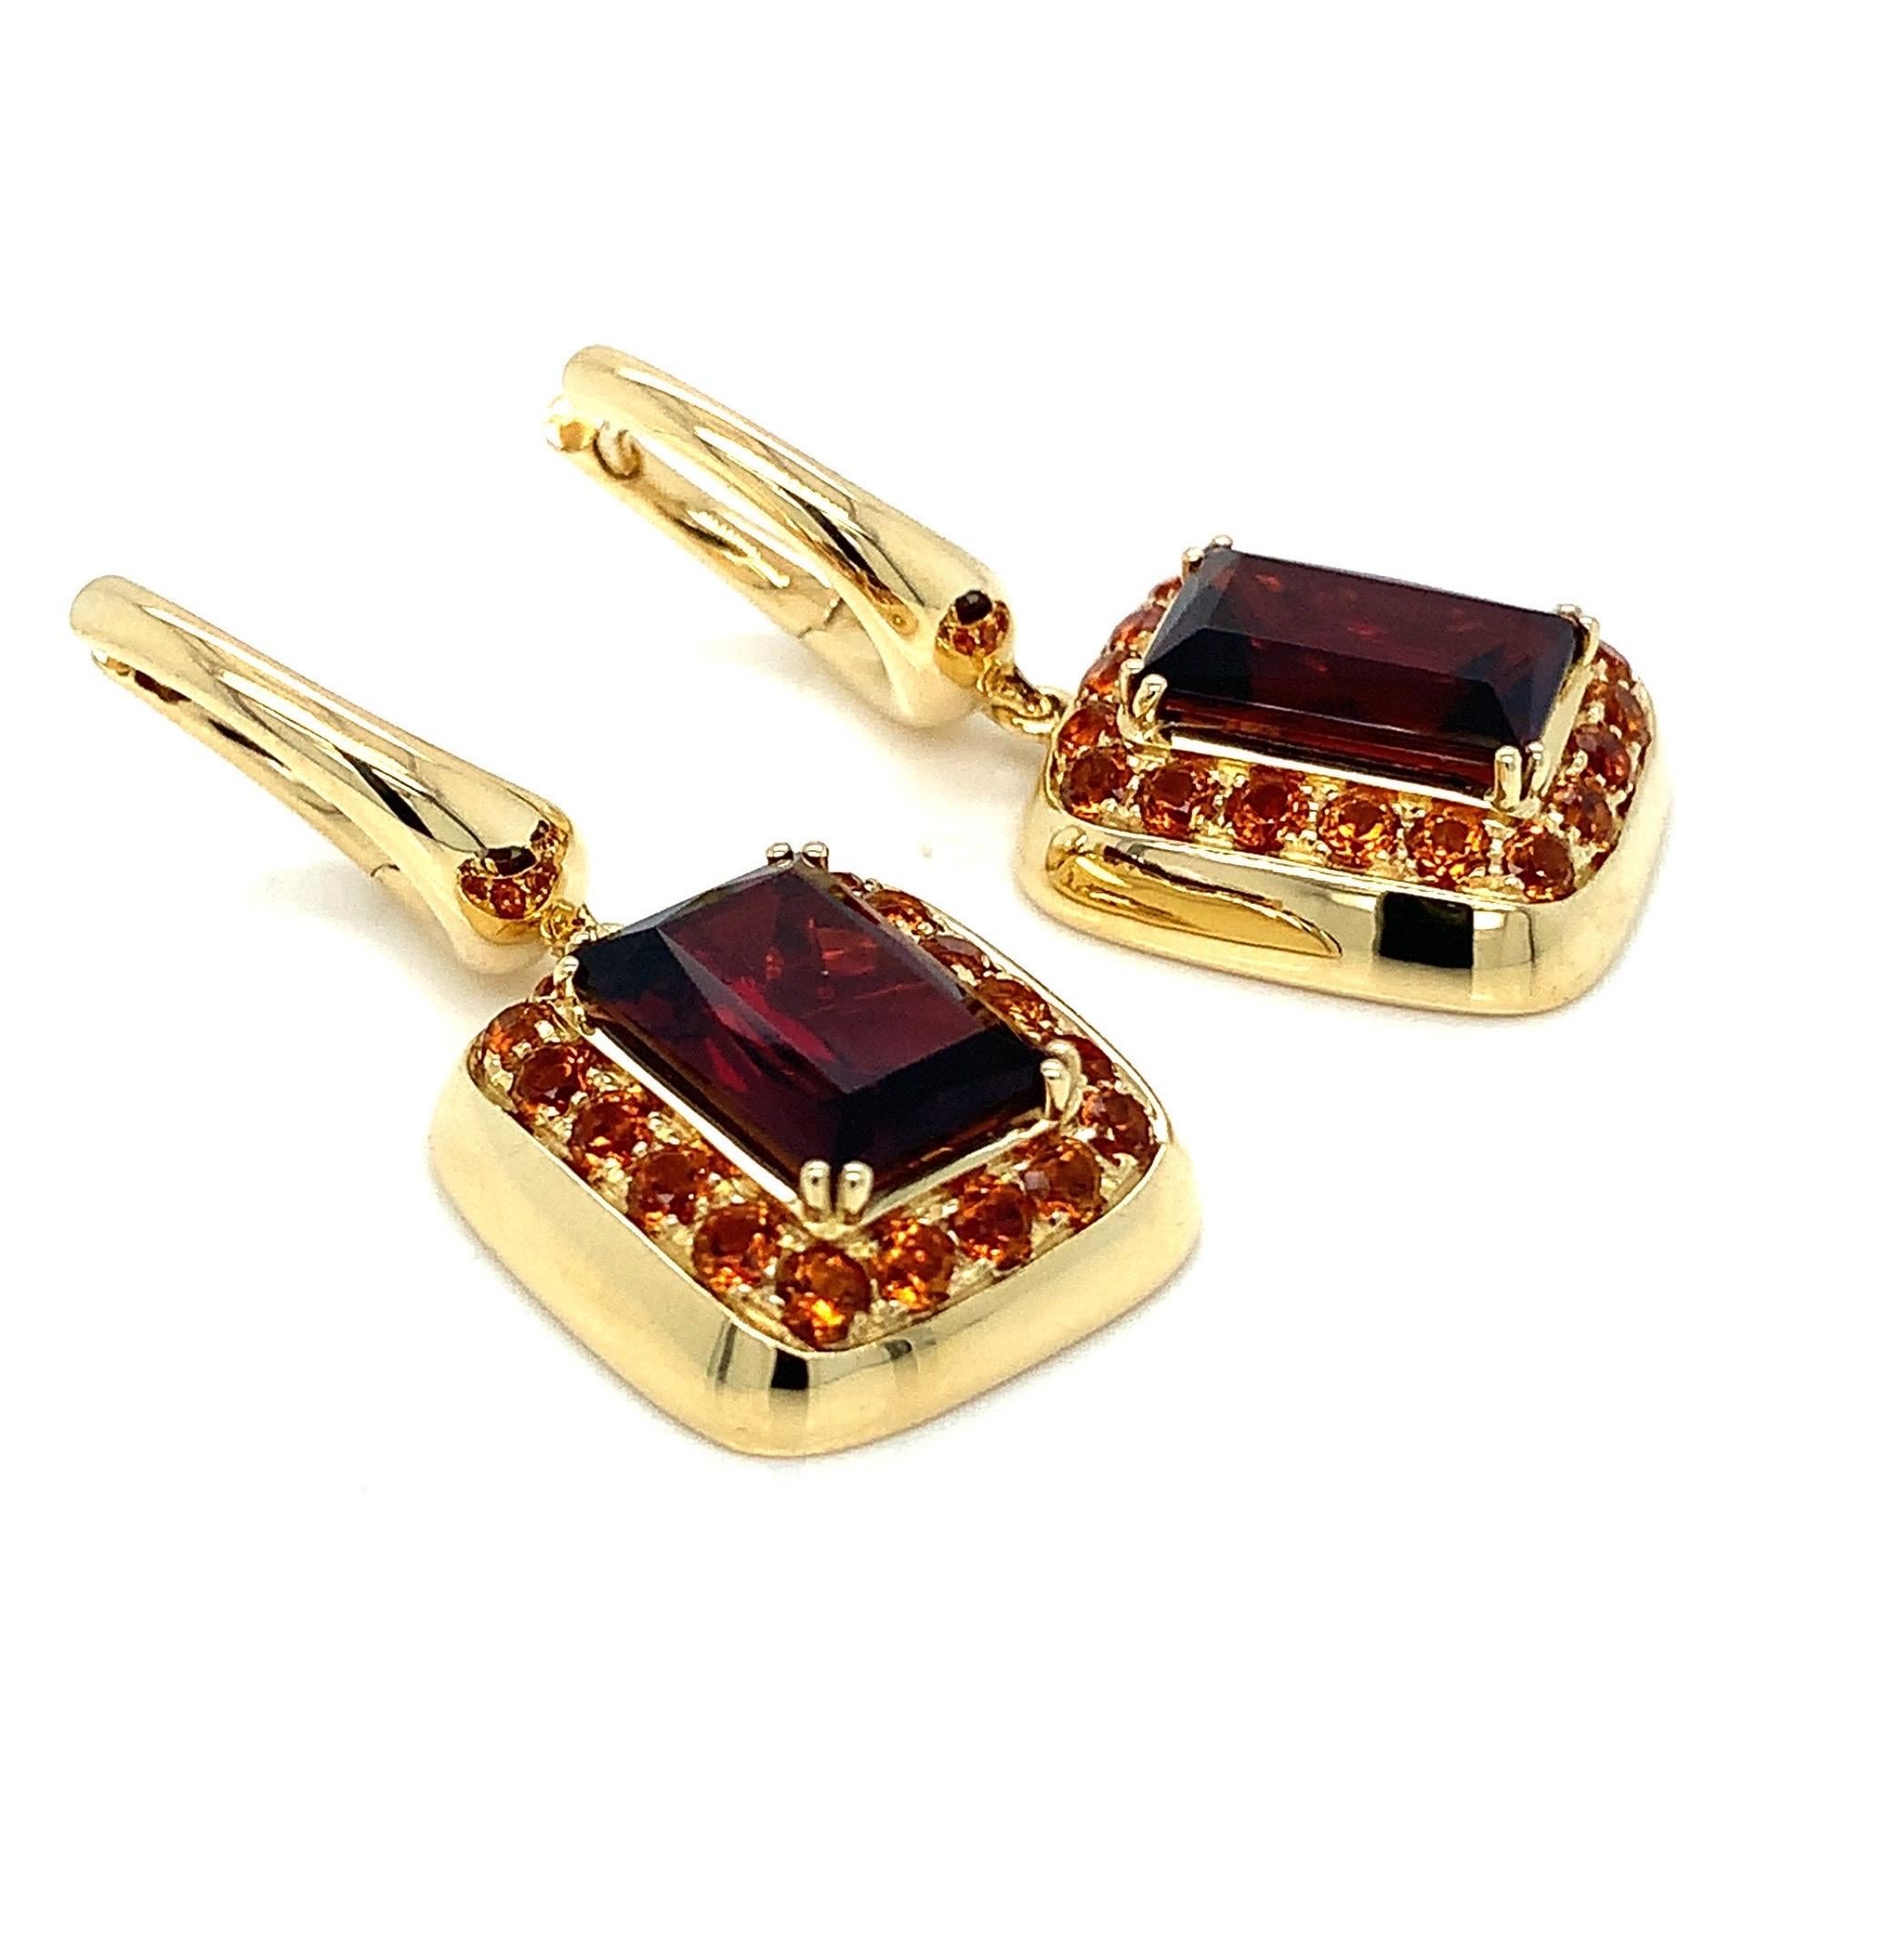 Elevate your style with our exquisite 18-karat yellow gold earrings from the Milano Garavelli collection, featuring   stunning Garnet centerstones and pavé Citrines. Each detail of these earrings reflects the artistry and craftsmanship that Milano